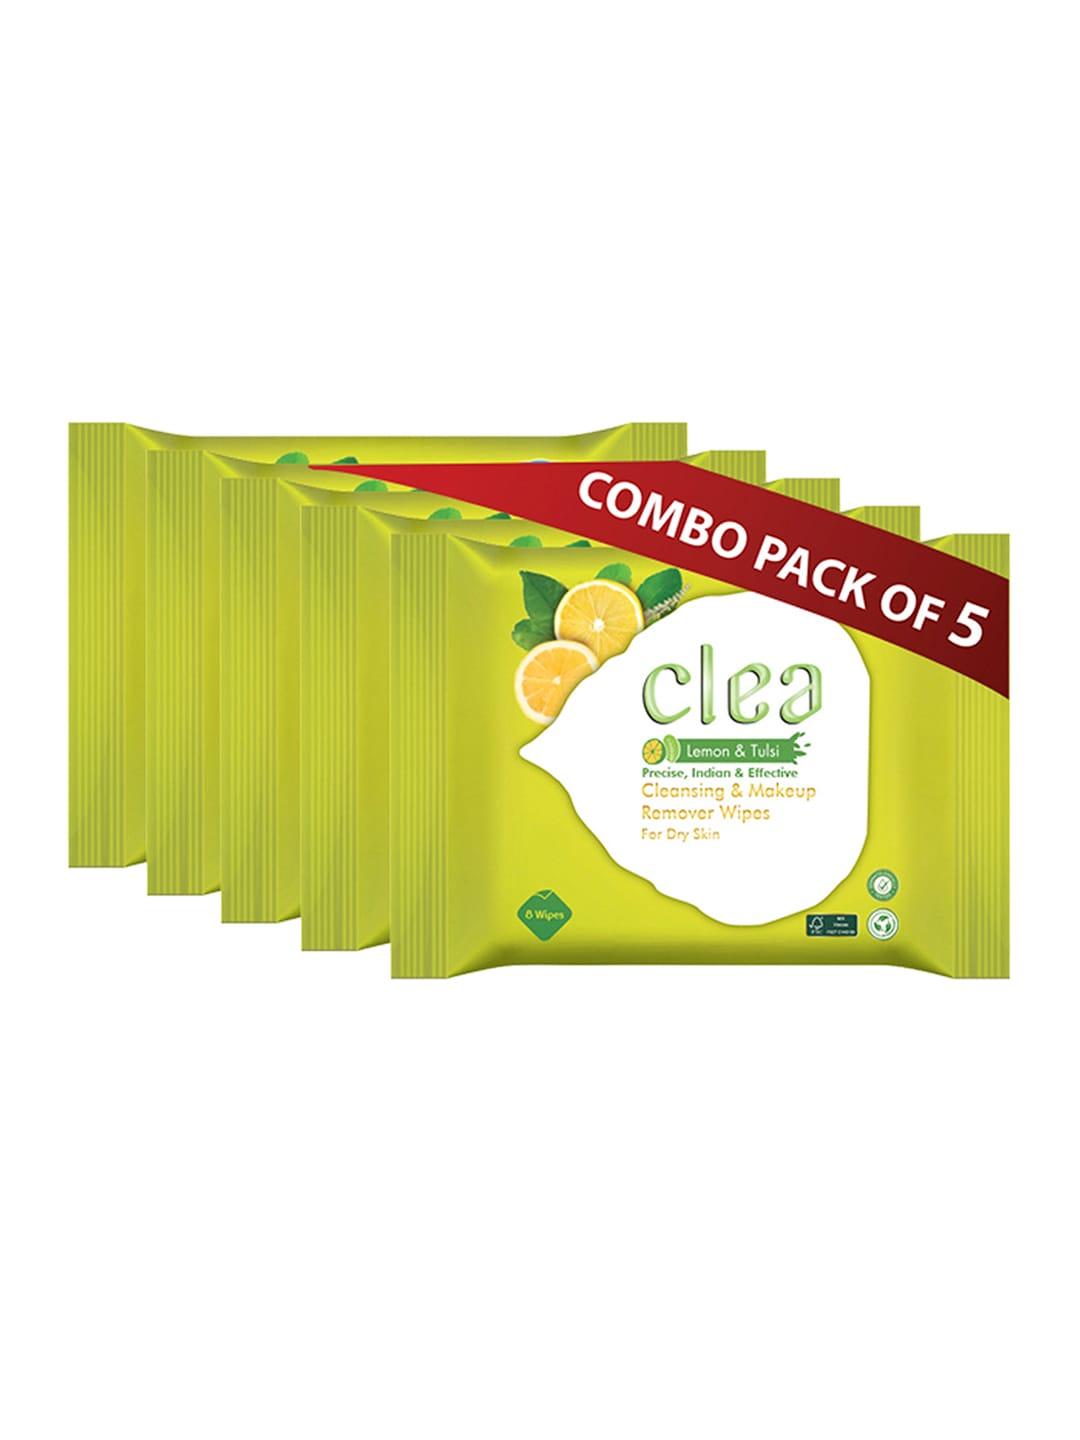 clea set of 5 lemon & tulsi cleansing & makeup remover wet wipes - 8 pulls each